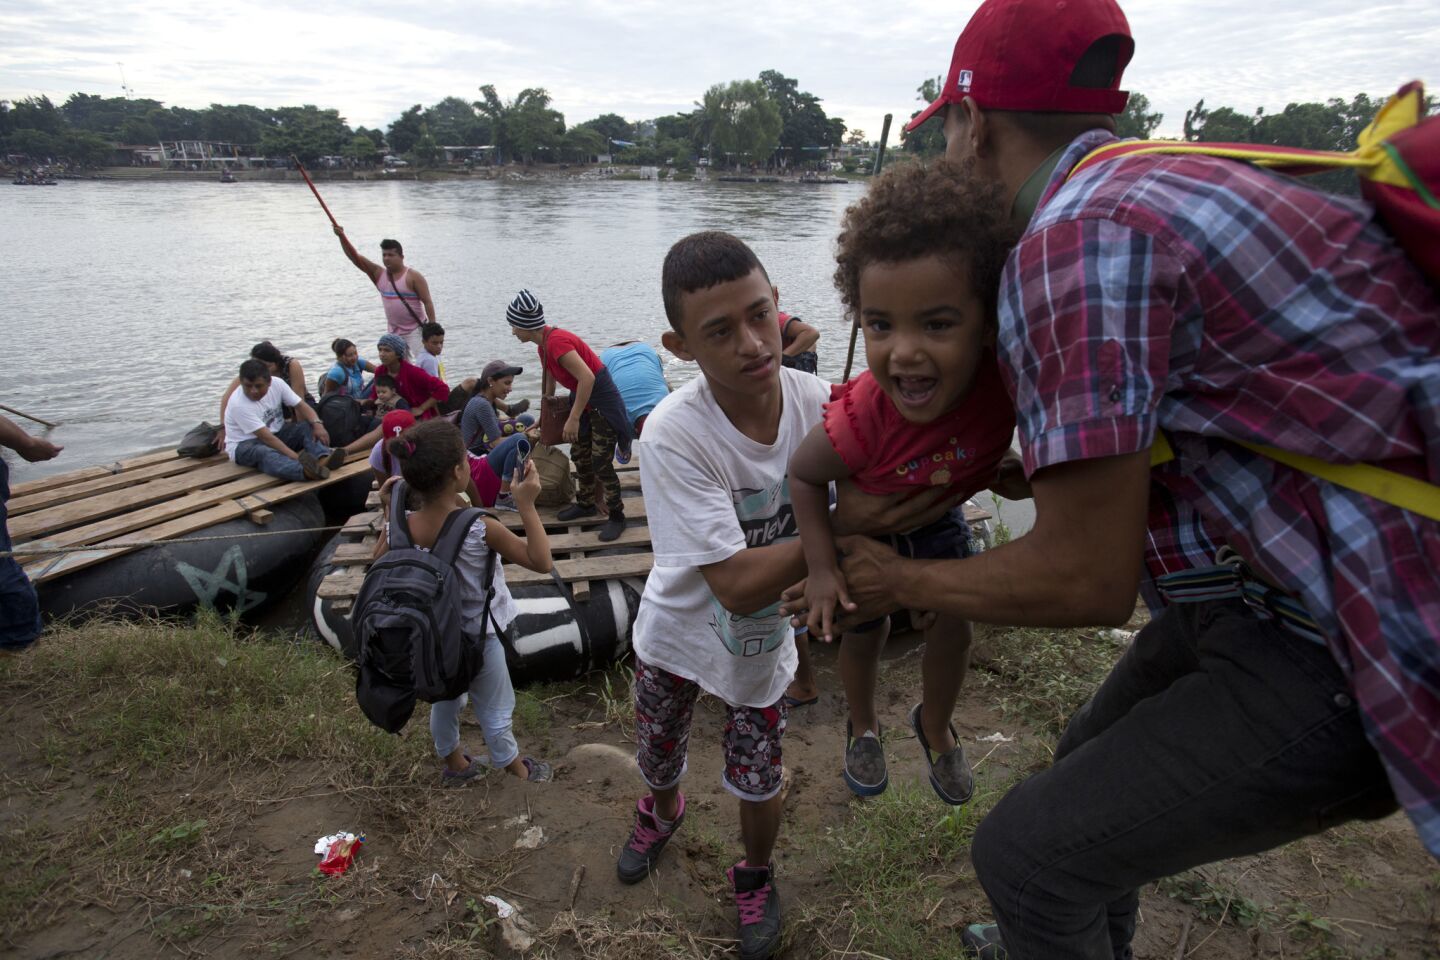 A group of Honduran migrants arrives to the Mexican side of the border after crossing the Suchiate River aboard a raft made out of tractor inner tubes and wooden planks, on the the border with Guatemala, in Ciudad Hidalgo, Mexico.